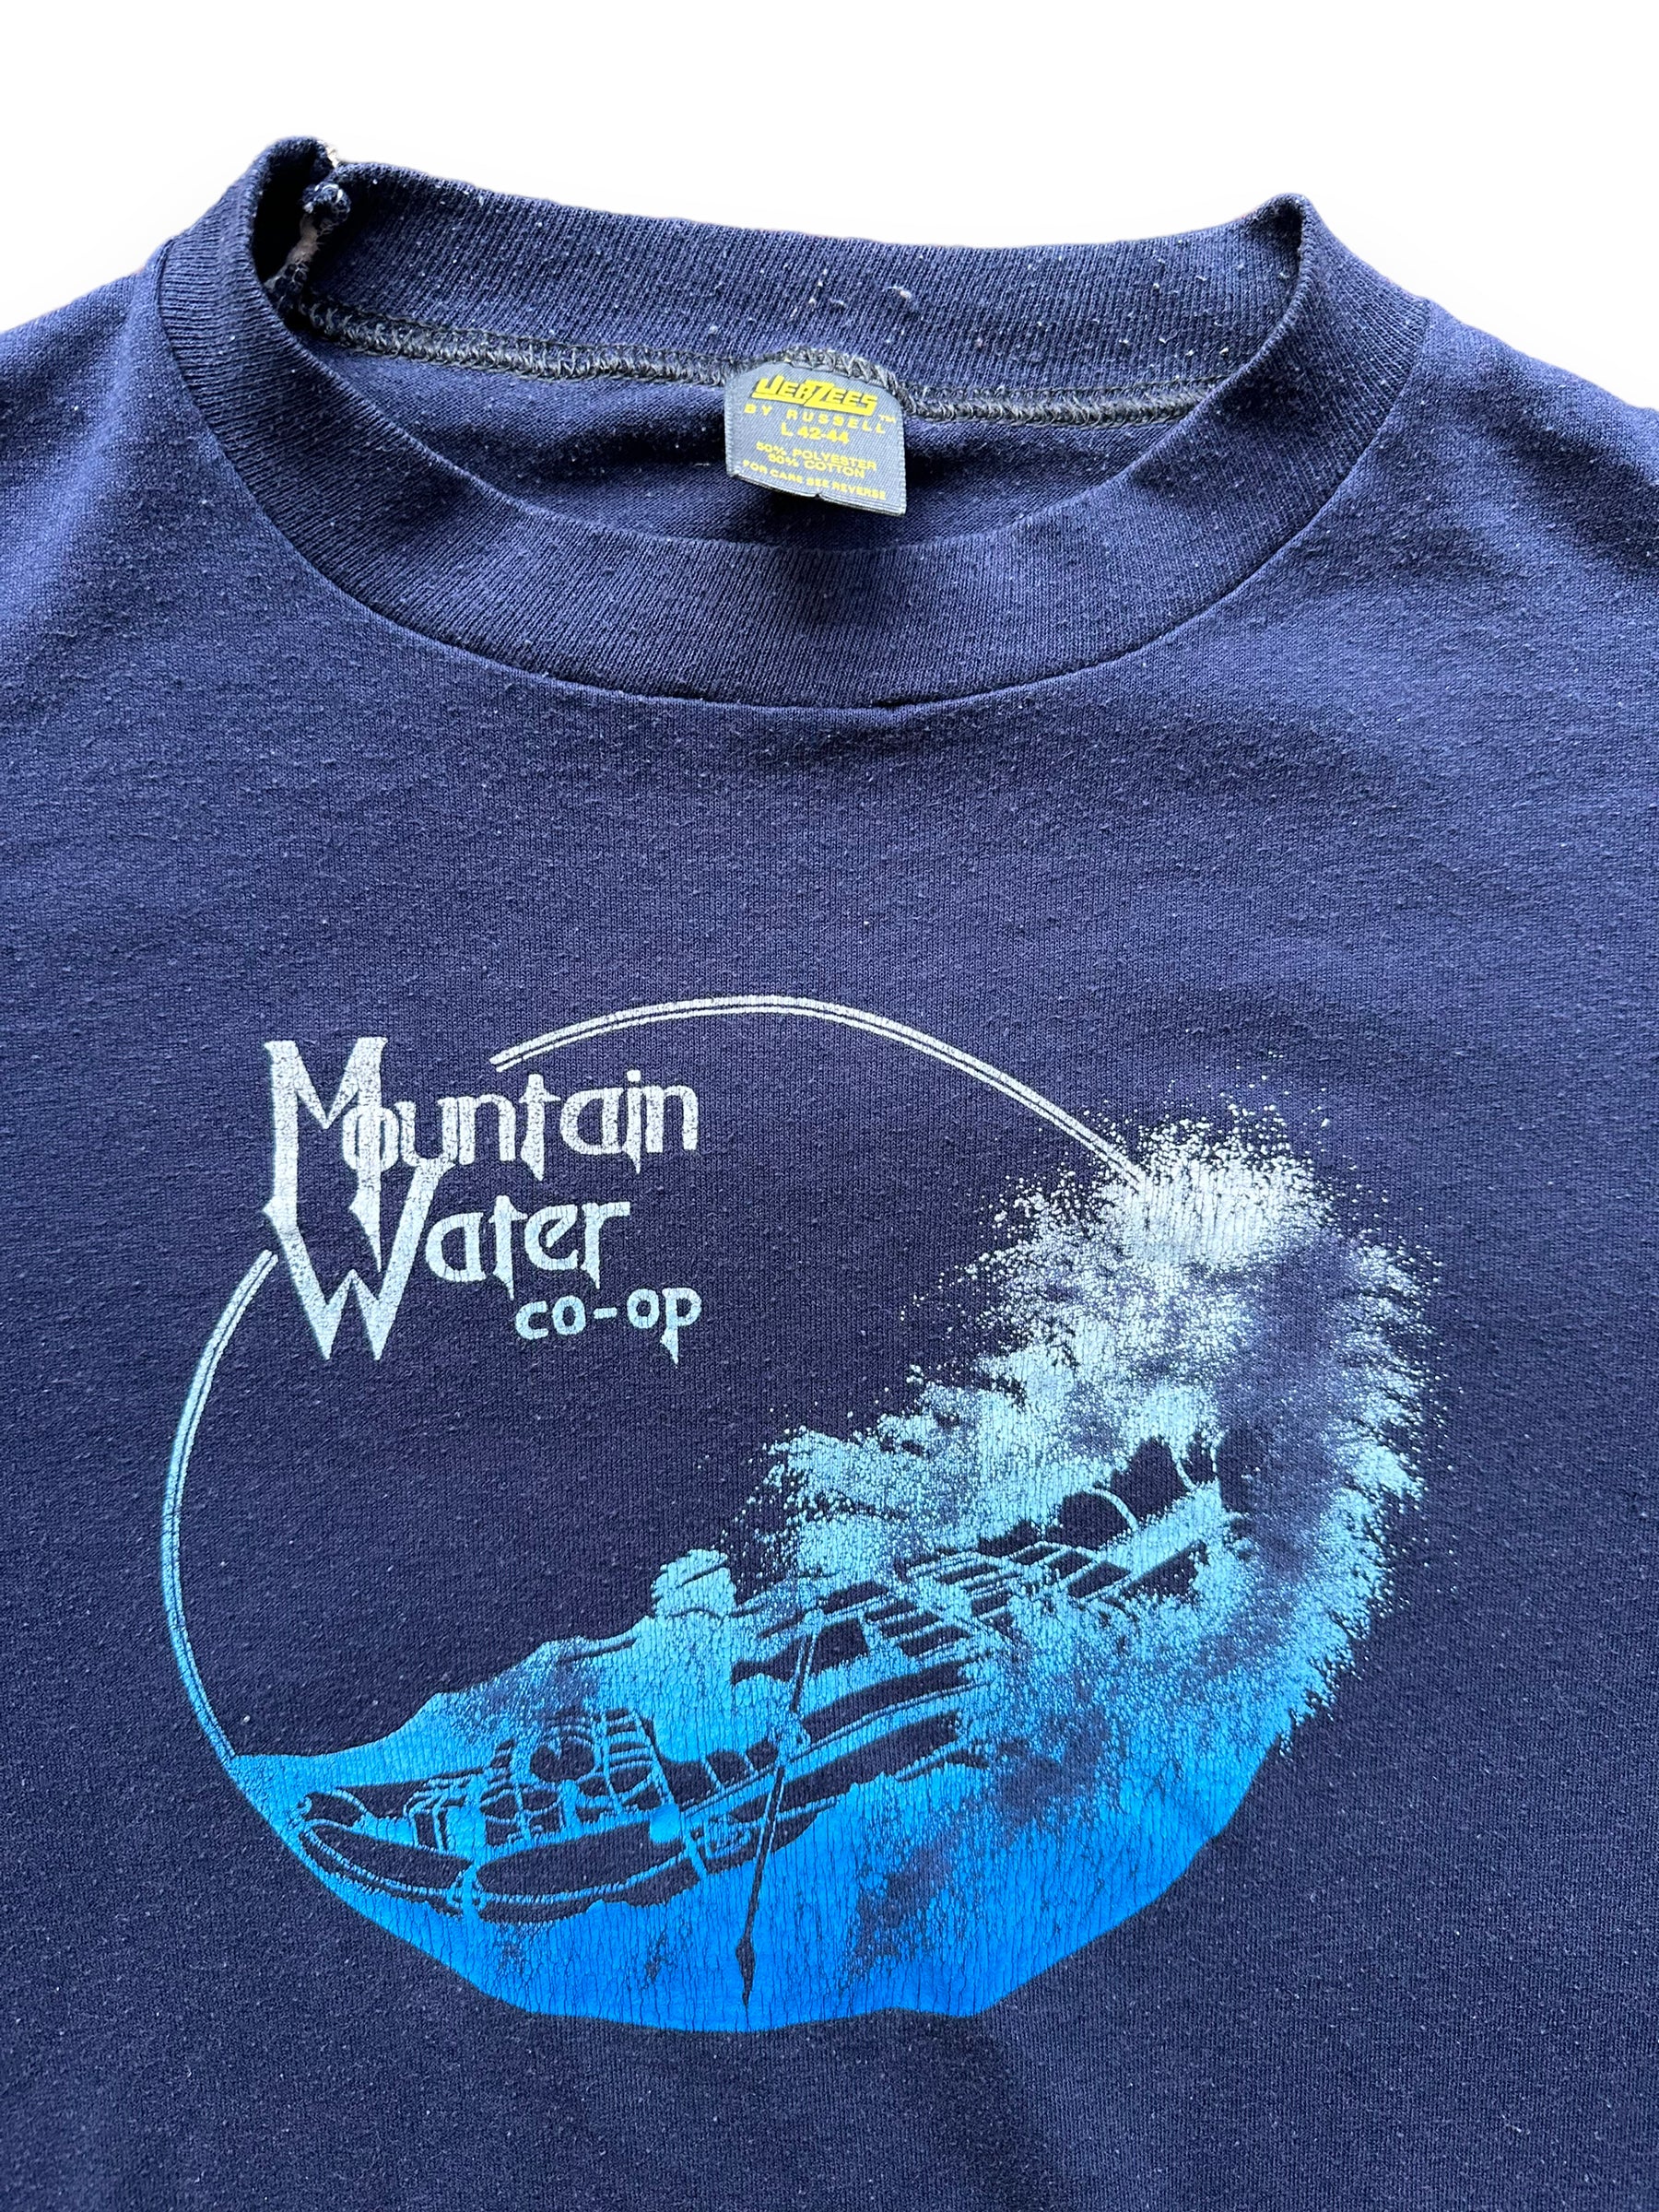 Vintage Mountain Water Co-op Tee Vintage | Seatt Barn Owl Graphic T-Shirts L The – SZ